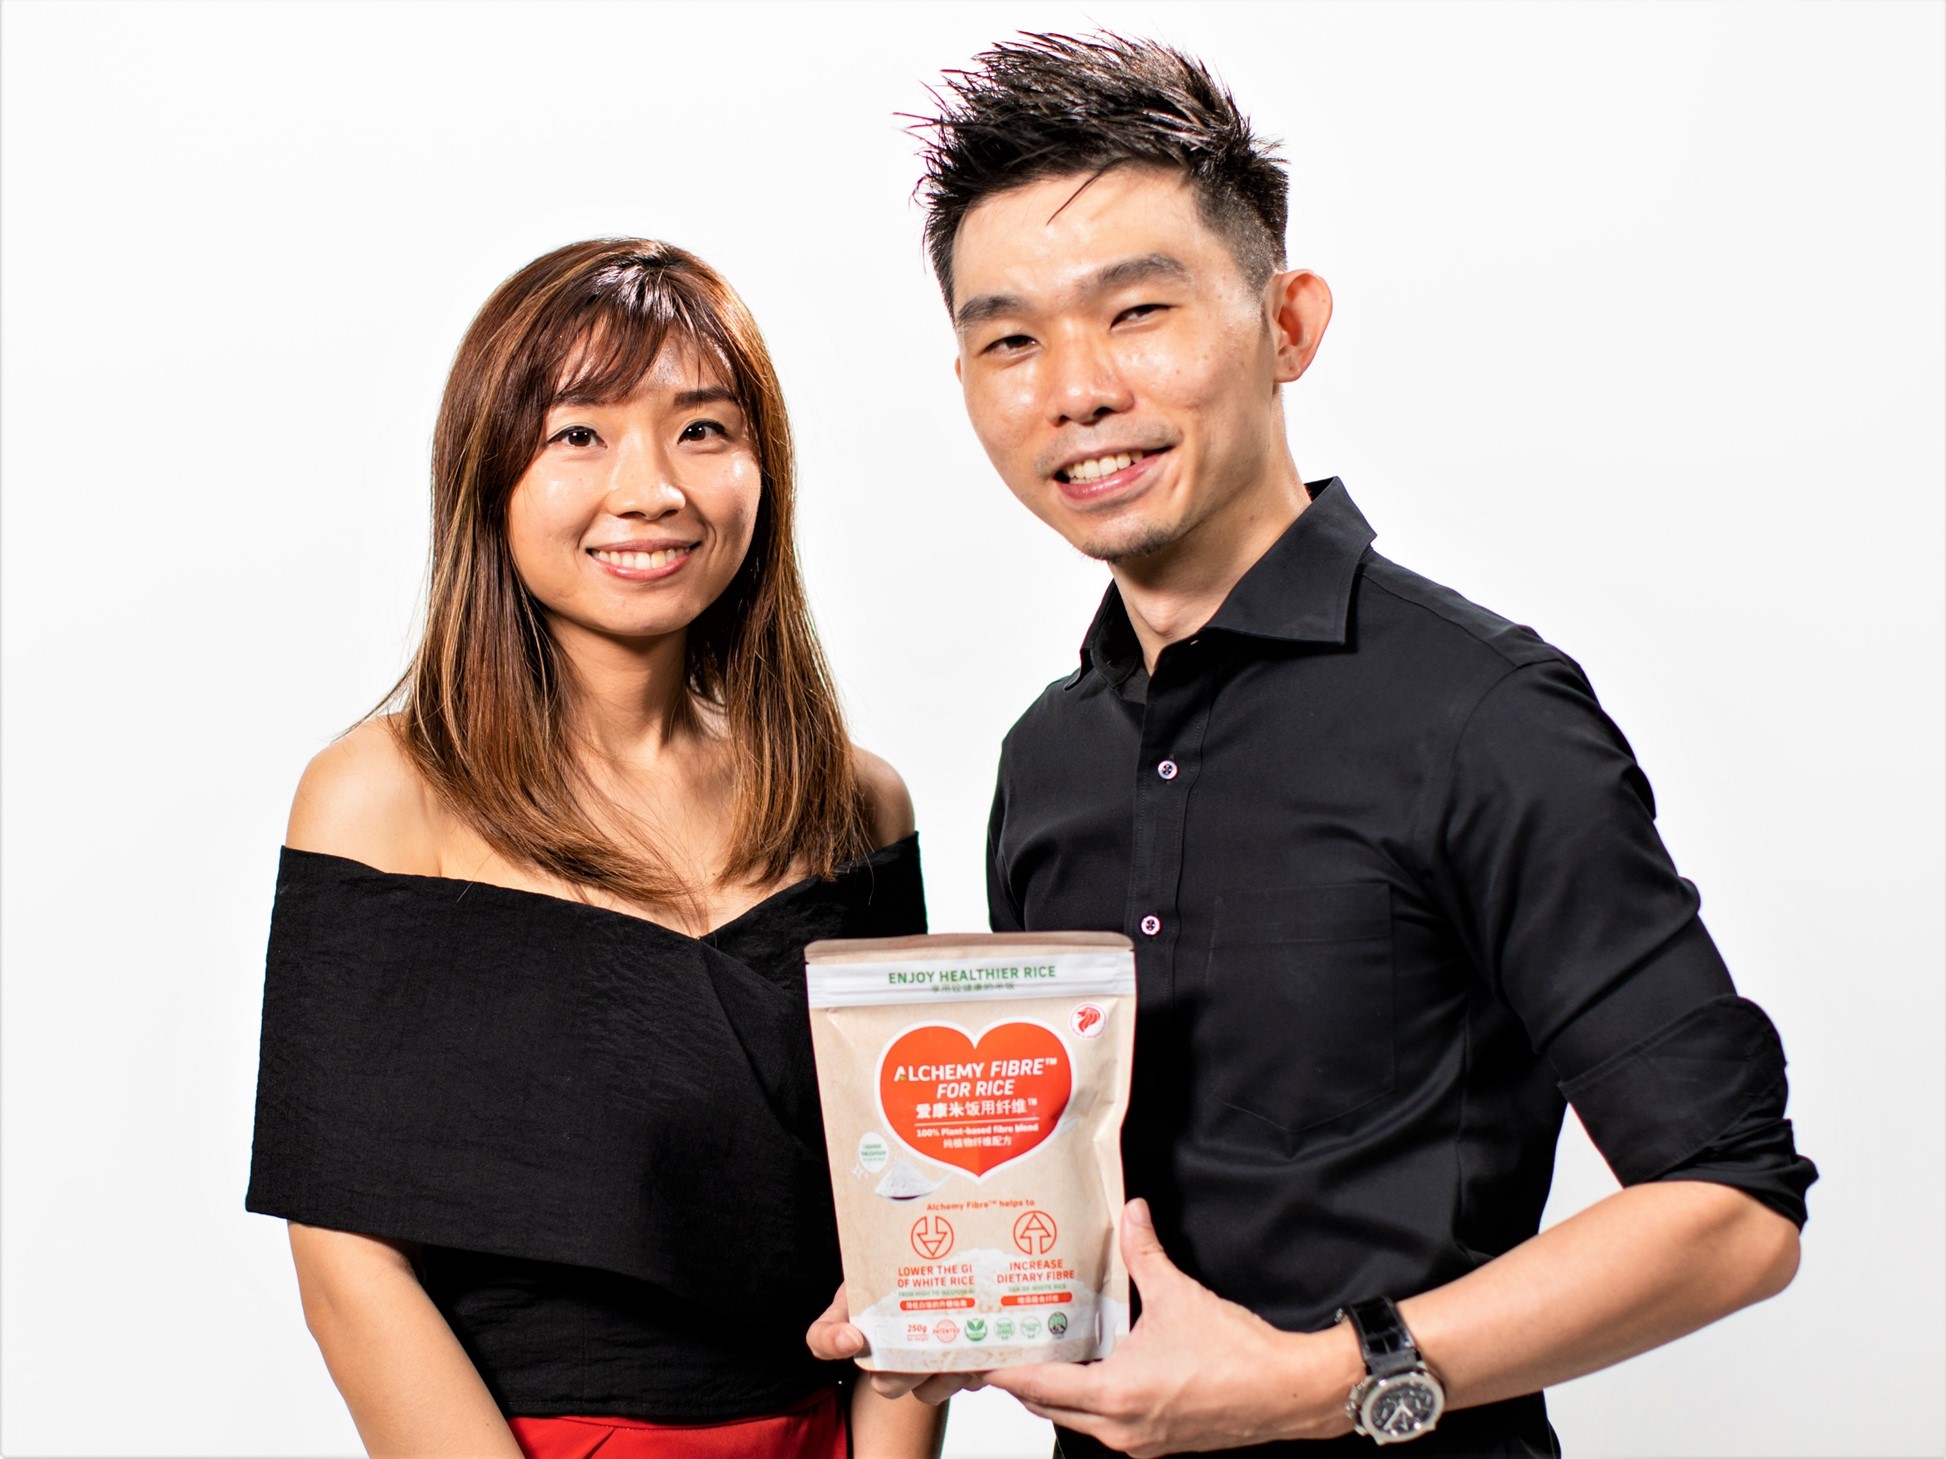 Co-Founders of Alchemy Foodtech, Verleen (L) and Alan (R), deliver one healthier meal at a time